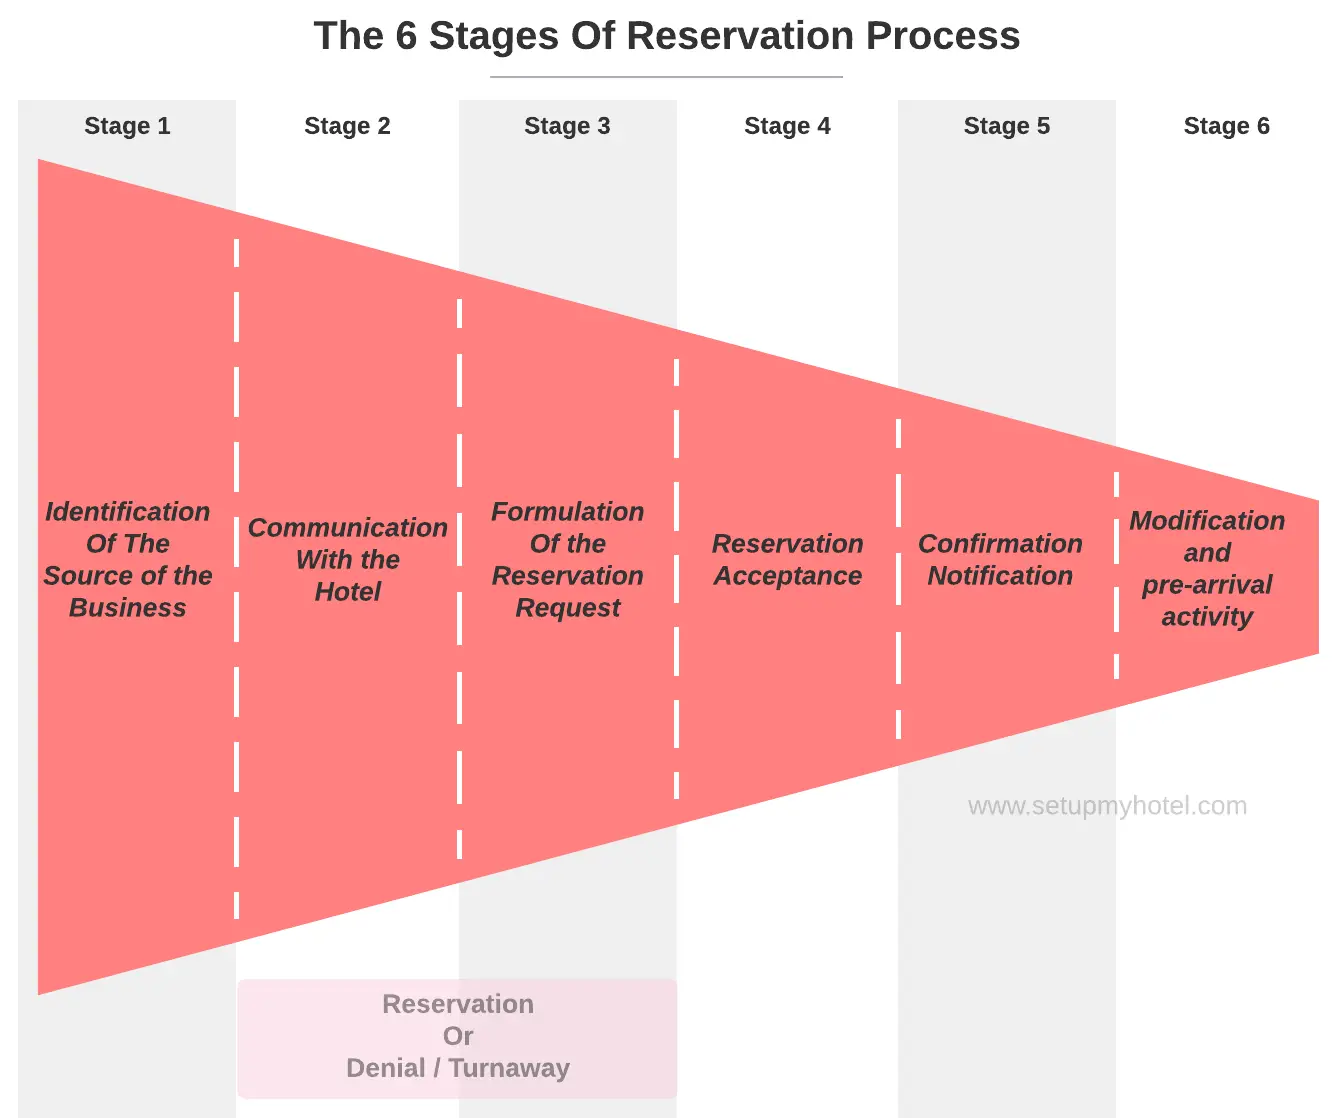 The reservation process is an important aspect of hotel management. It involves a number of stages that are crucial for ensuring a smooth and hassle-free guest experience. The first stage is the initial inquiry, where the guest contacts the hotel to check availability of rooms and rates. This can be done through various means such as phone, email, or the hotel's website. Once the guest has confirmed their interest in making a reservation, the hotel will ask for details such as the dates of stay, number of guests, and room preferences. Based on this information, the hotel will then offer available options and rates to the guest. The next stage is the actual reservation, where the guest confirms their booking by providing personal and payment information. This is usually done through a secure online booking system or over the phone with a reservation agent. After the reservation is confirmed, the hotel will send a confirmation email or message to the guest, which will include important details such as the reservation dates, room type, rate, and cancellation policy. The final stage is the check-in process, where the guest arrives at the hotel and is welcomed by the front desk staff. The guest will be asked to provide identification and payment, and will be given room keys and any necessary information about the hotel's amenities and services. Overall, a well-managed reservation process is essential for ensuring guest satisfaction and creating a positive reputation for the hotel.